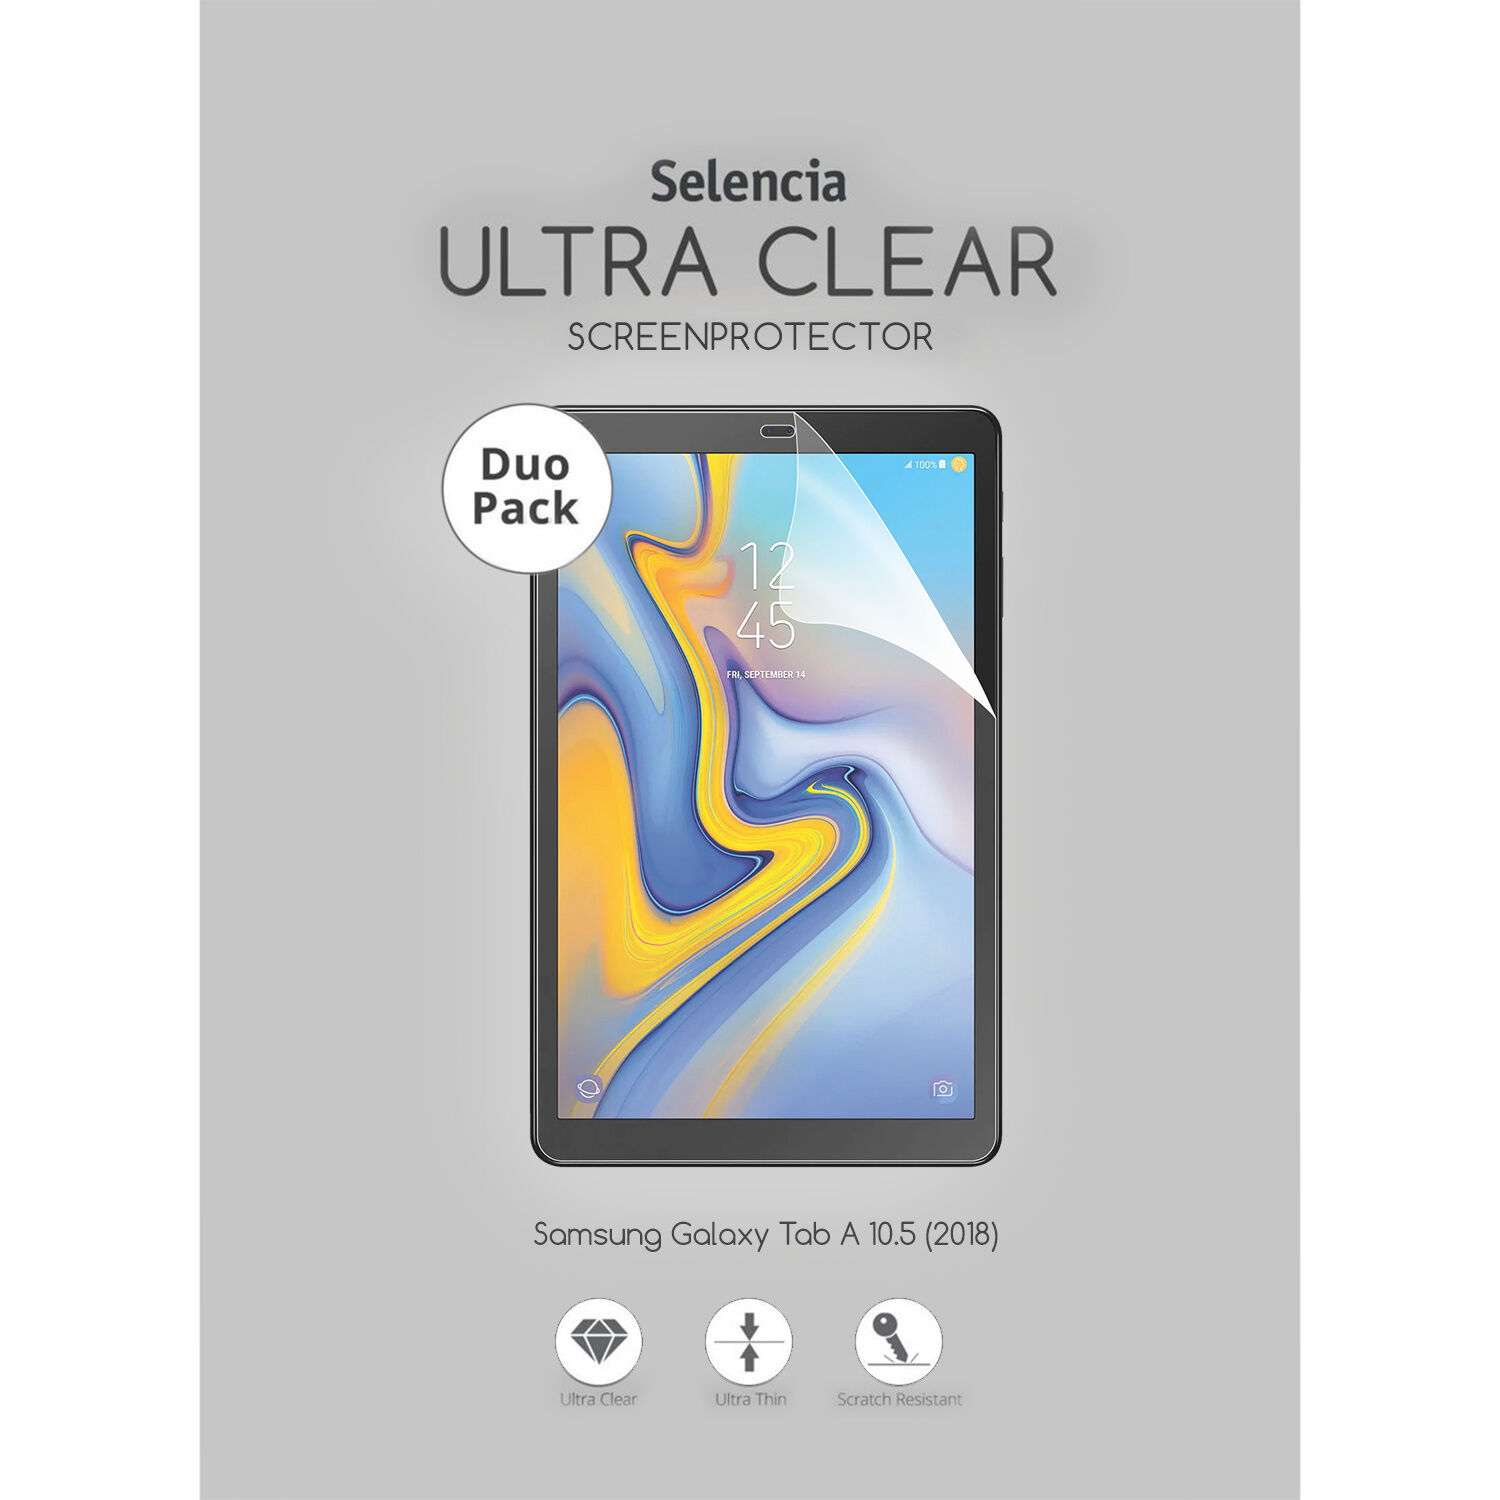 Selencia Protection d'écran Duo Pack Ultra Clear pour le Samsung Galaxy Tab A 10.5 (2018)